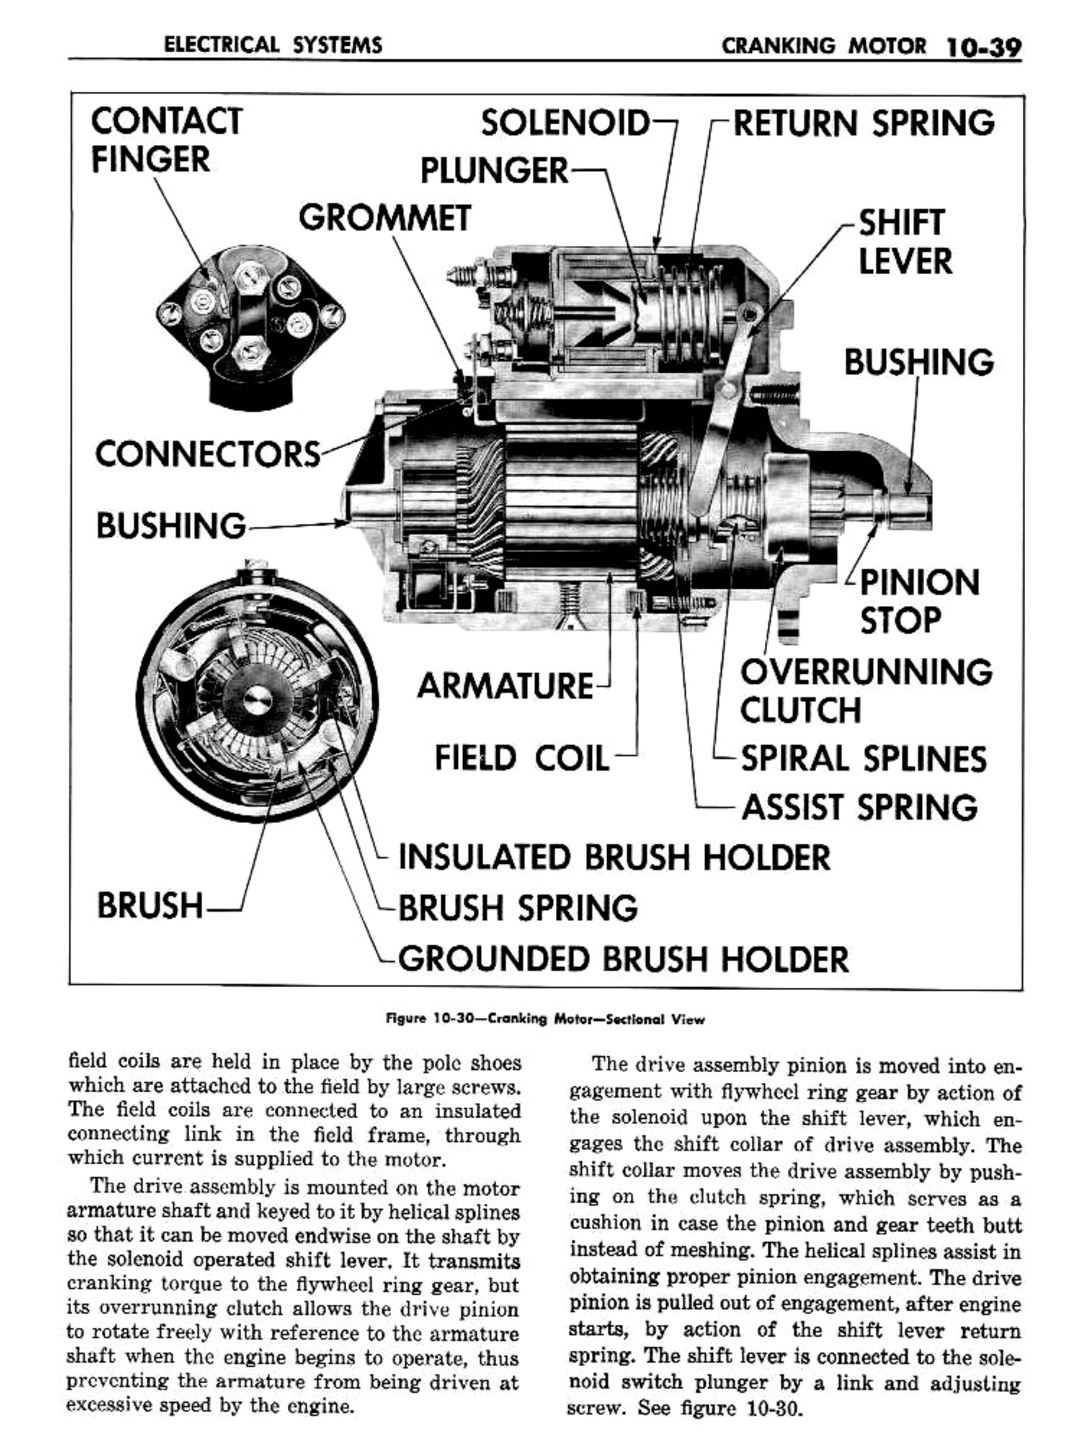 n_11 1957 Buick Shop Manual - Electrical Systems-039-039.jpg